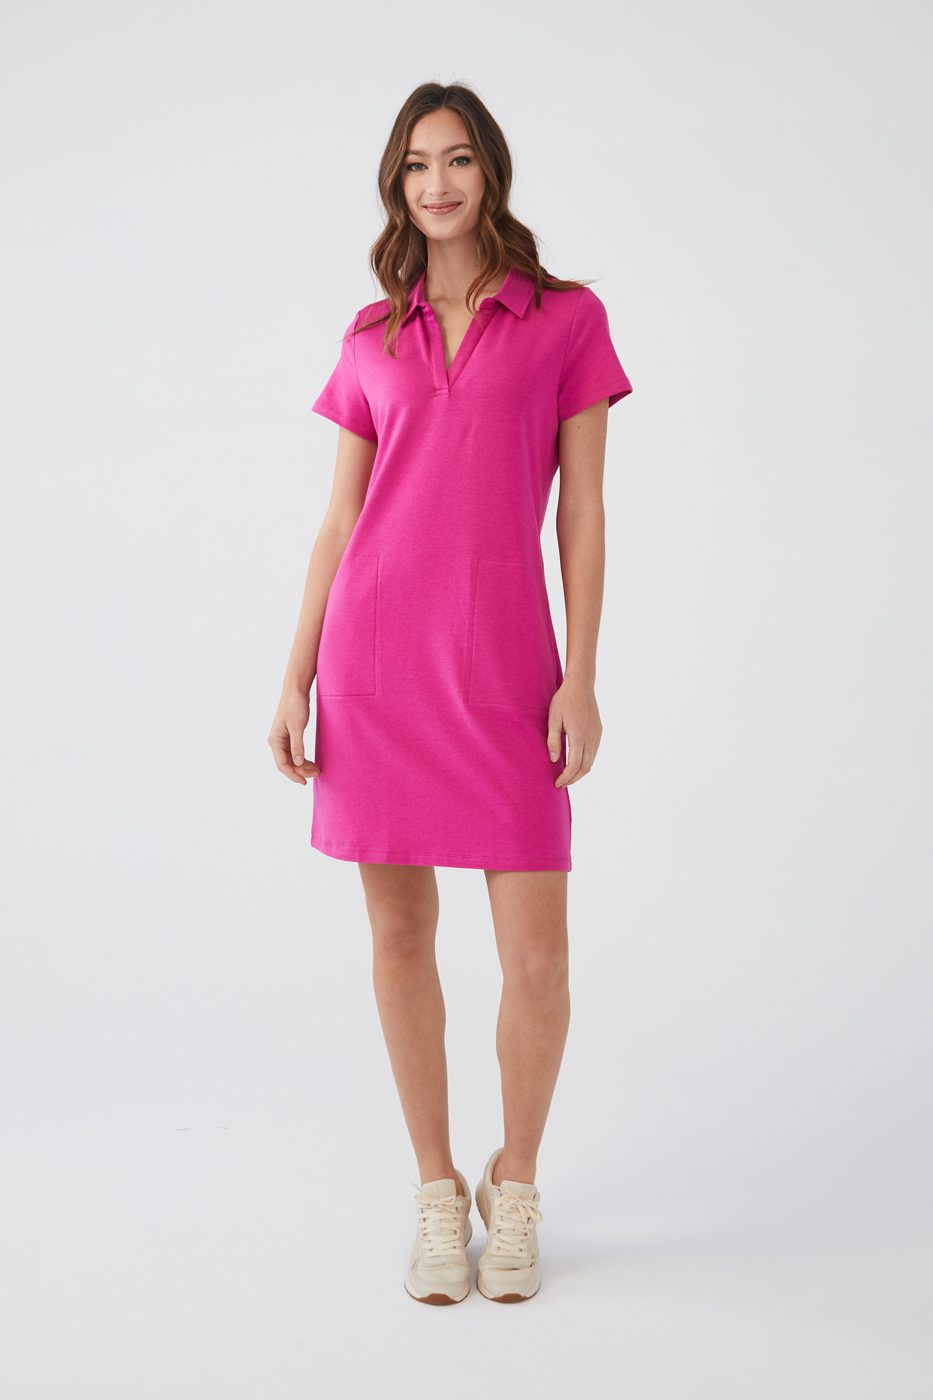 An everyday essential, our polo dress in a brilliant magenta color is an easy and comfortable style for almost every occasion. Whether you are going to the grocery store or a golf session during your vacation, this is the dress you will want to wear again and again.  Color- Magenta Pull-over. Polo style. Short sleeve.